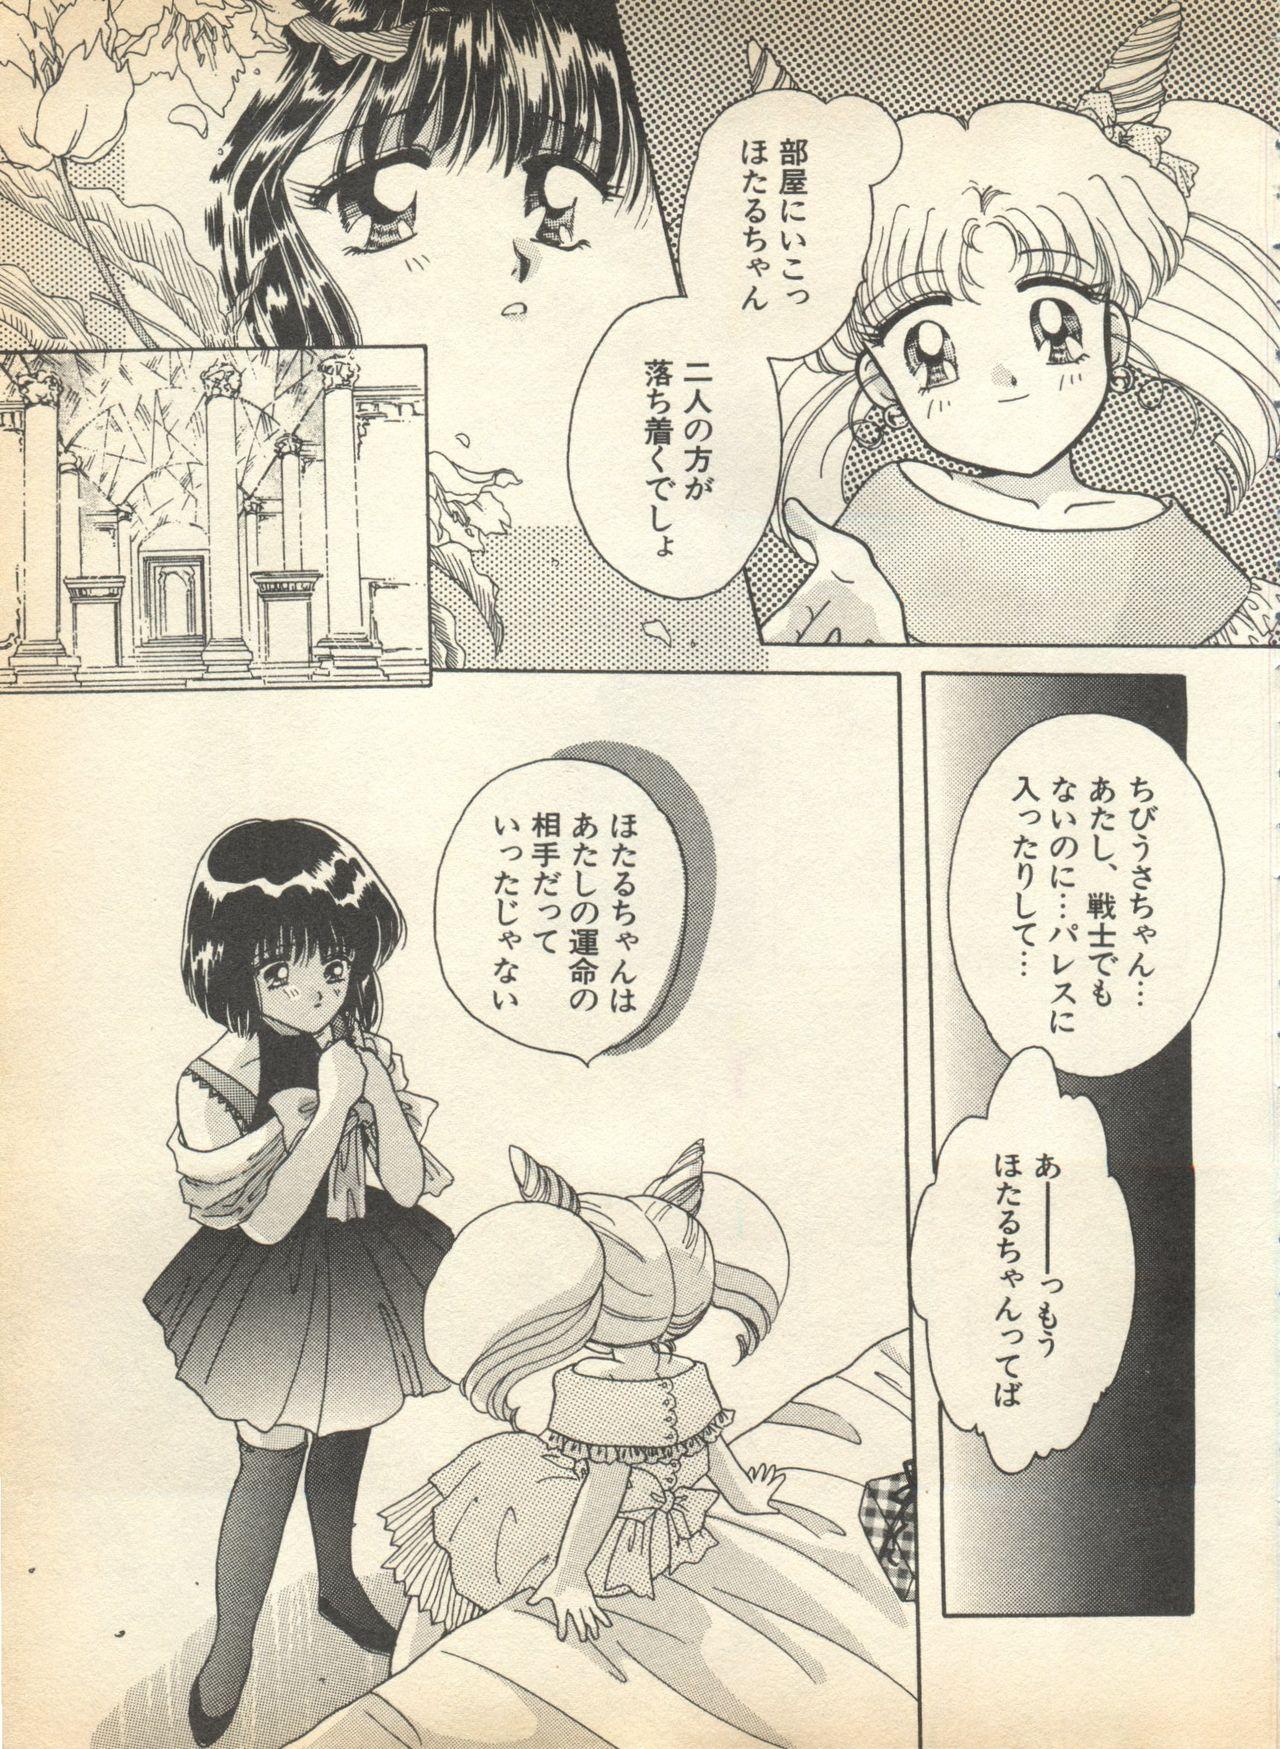 Exhib Lunatic Party 8 - Sailor moon Chastity - Page 9